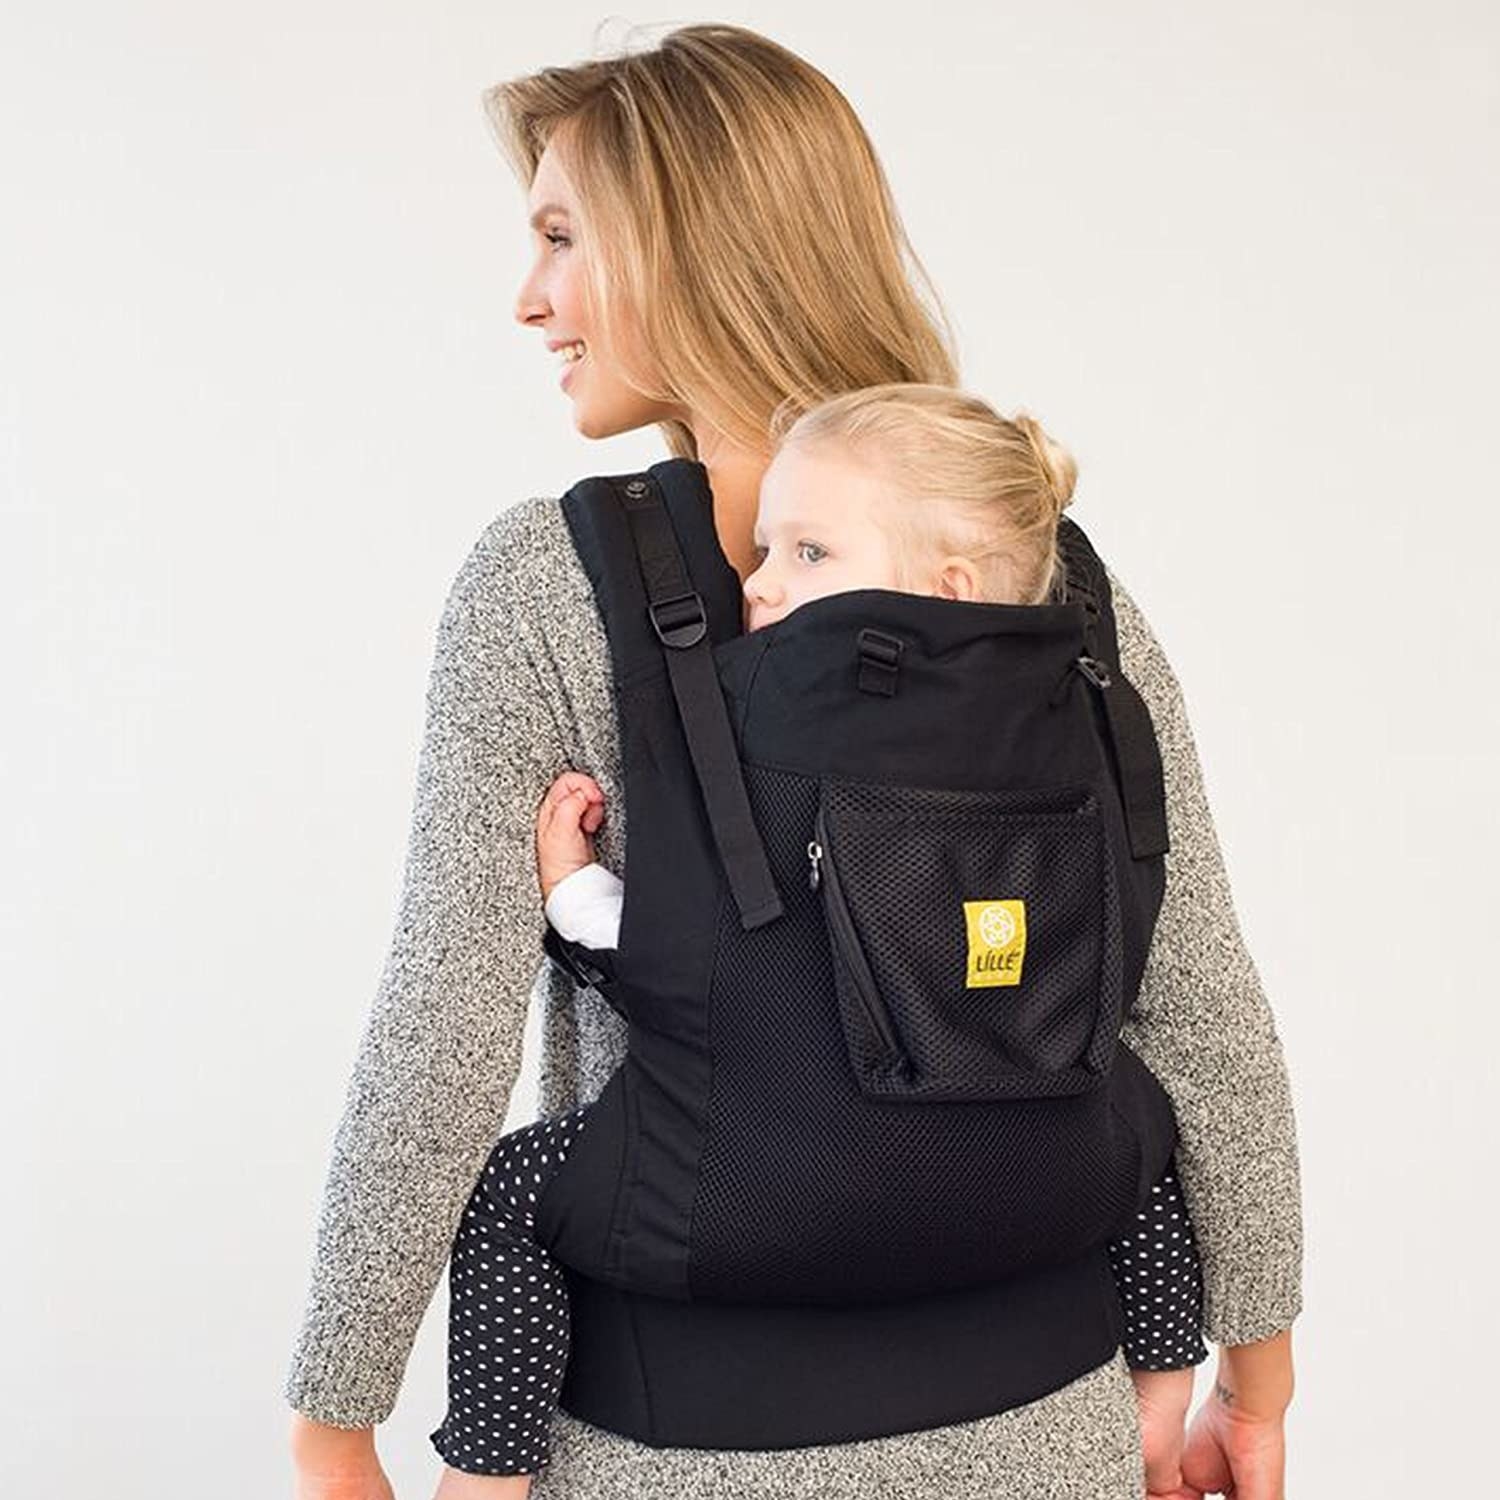 Model with a black carrier with a toddler strapped to their back